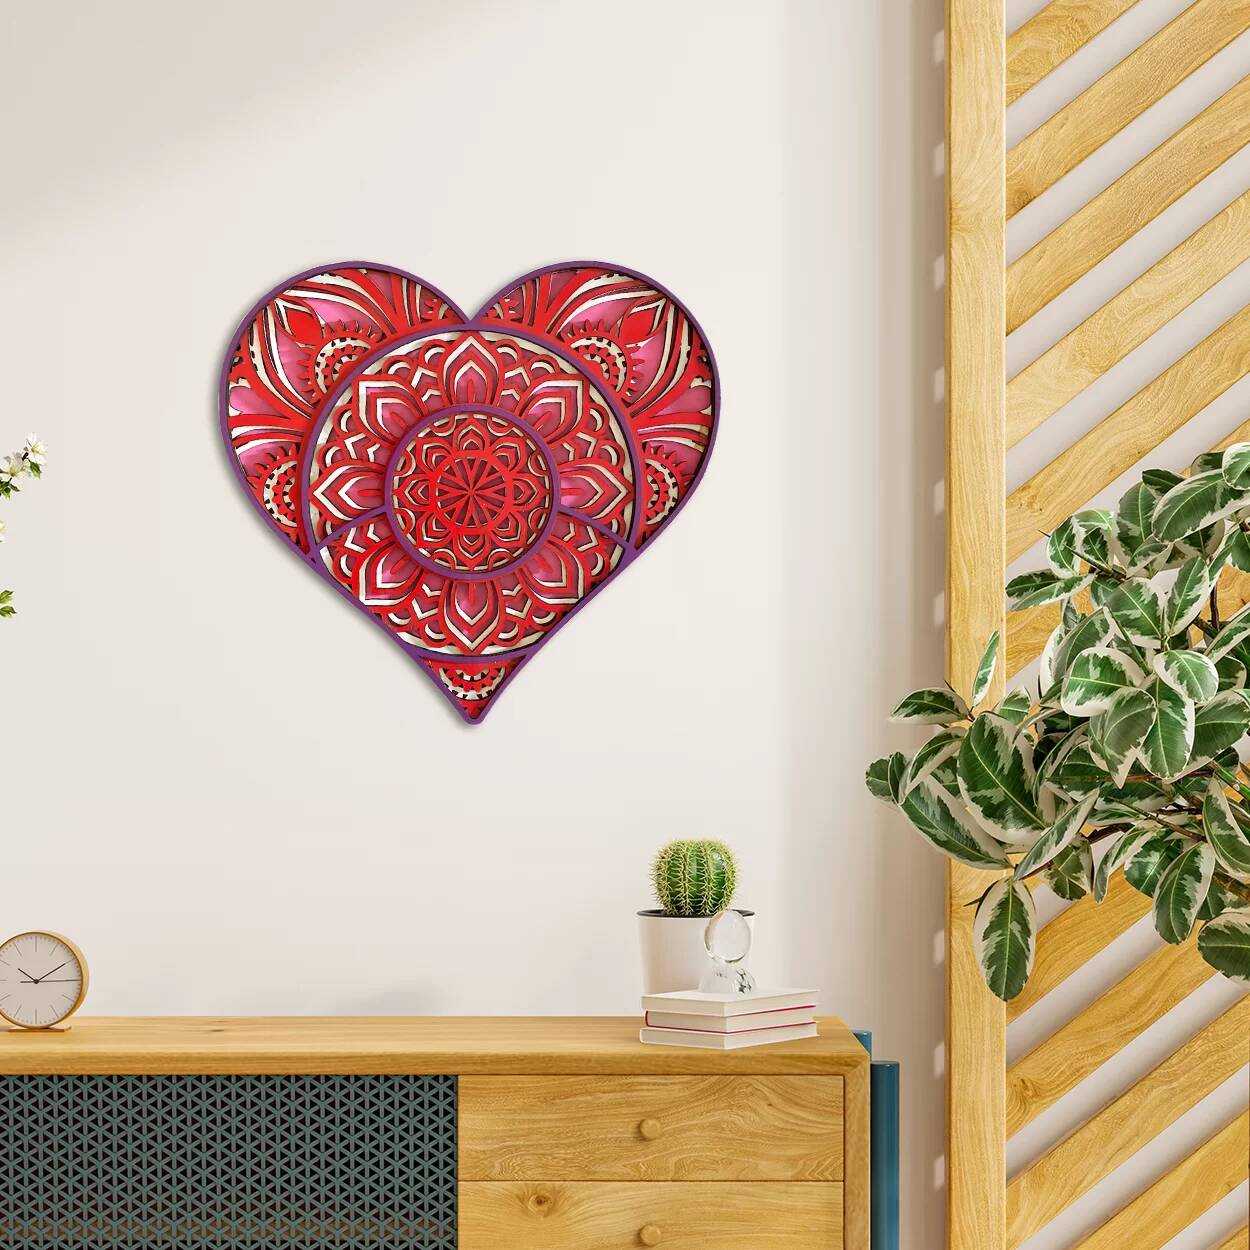 Add warmth and charm to your space with our Wooden Heart Wall Art By STAGUMHome and LifestyleAll India